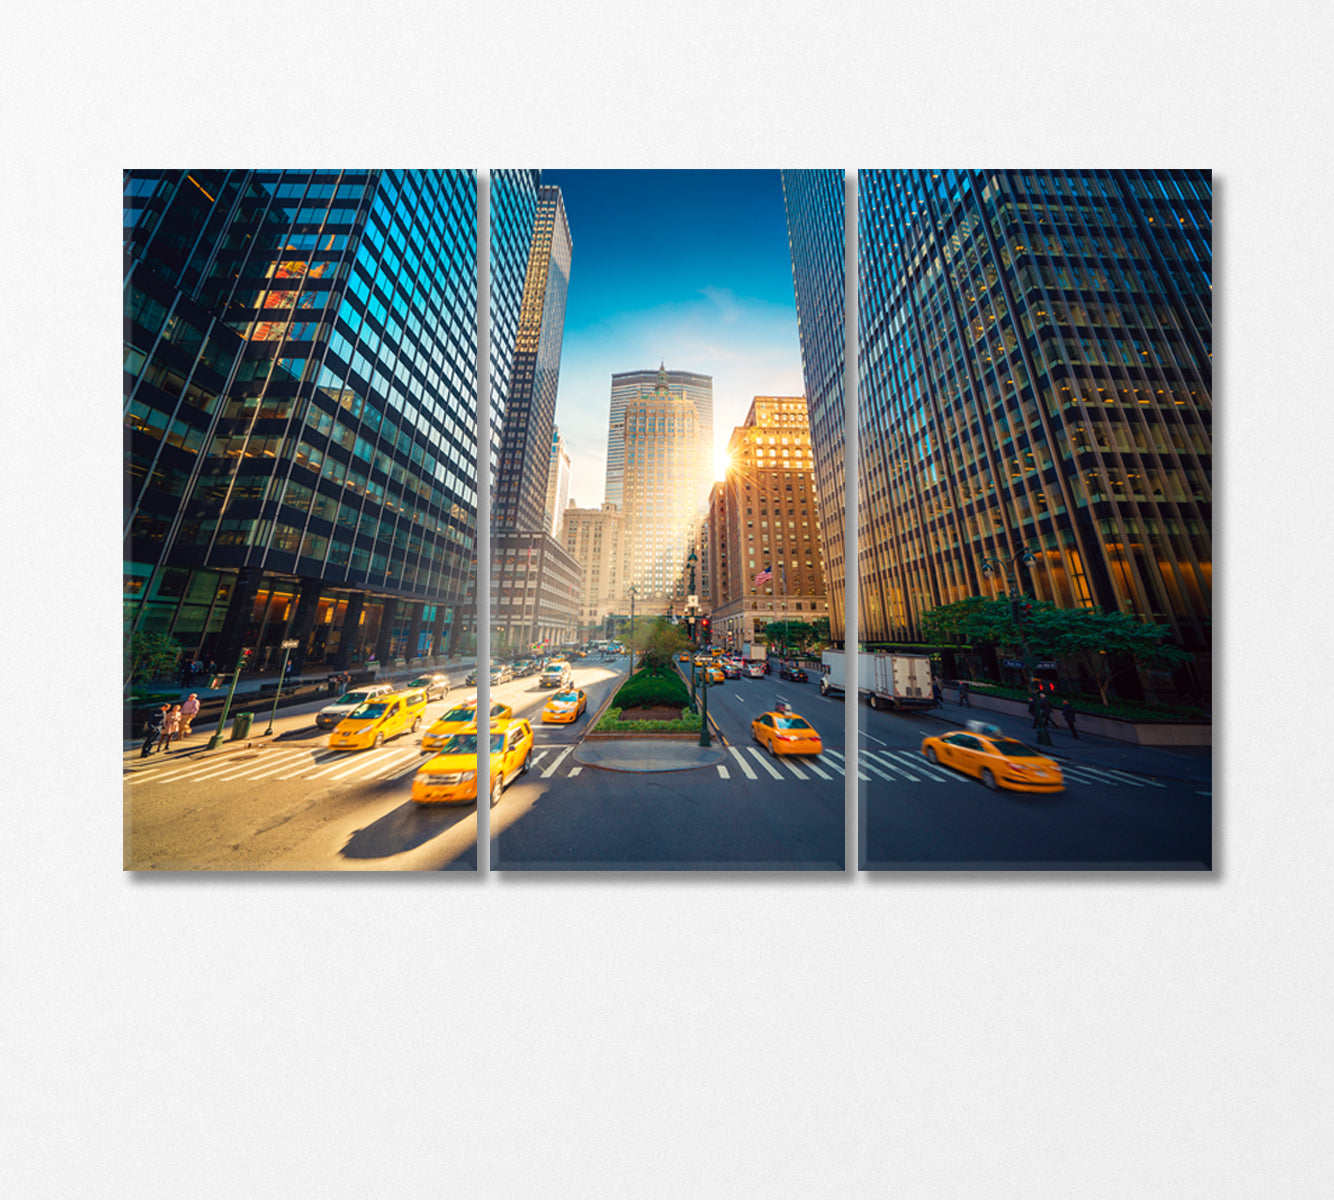 New York Skyscrapers and the Famous Yellow Taxi Cars Canvas Print-Canvas Print-CetArt-3 Panels-36x24 inches-CetArt